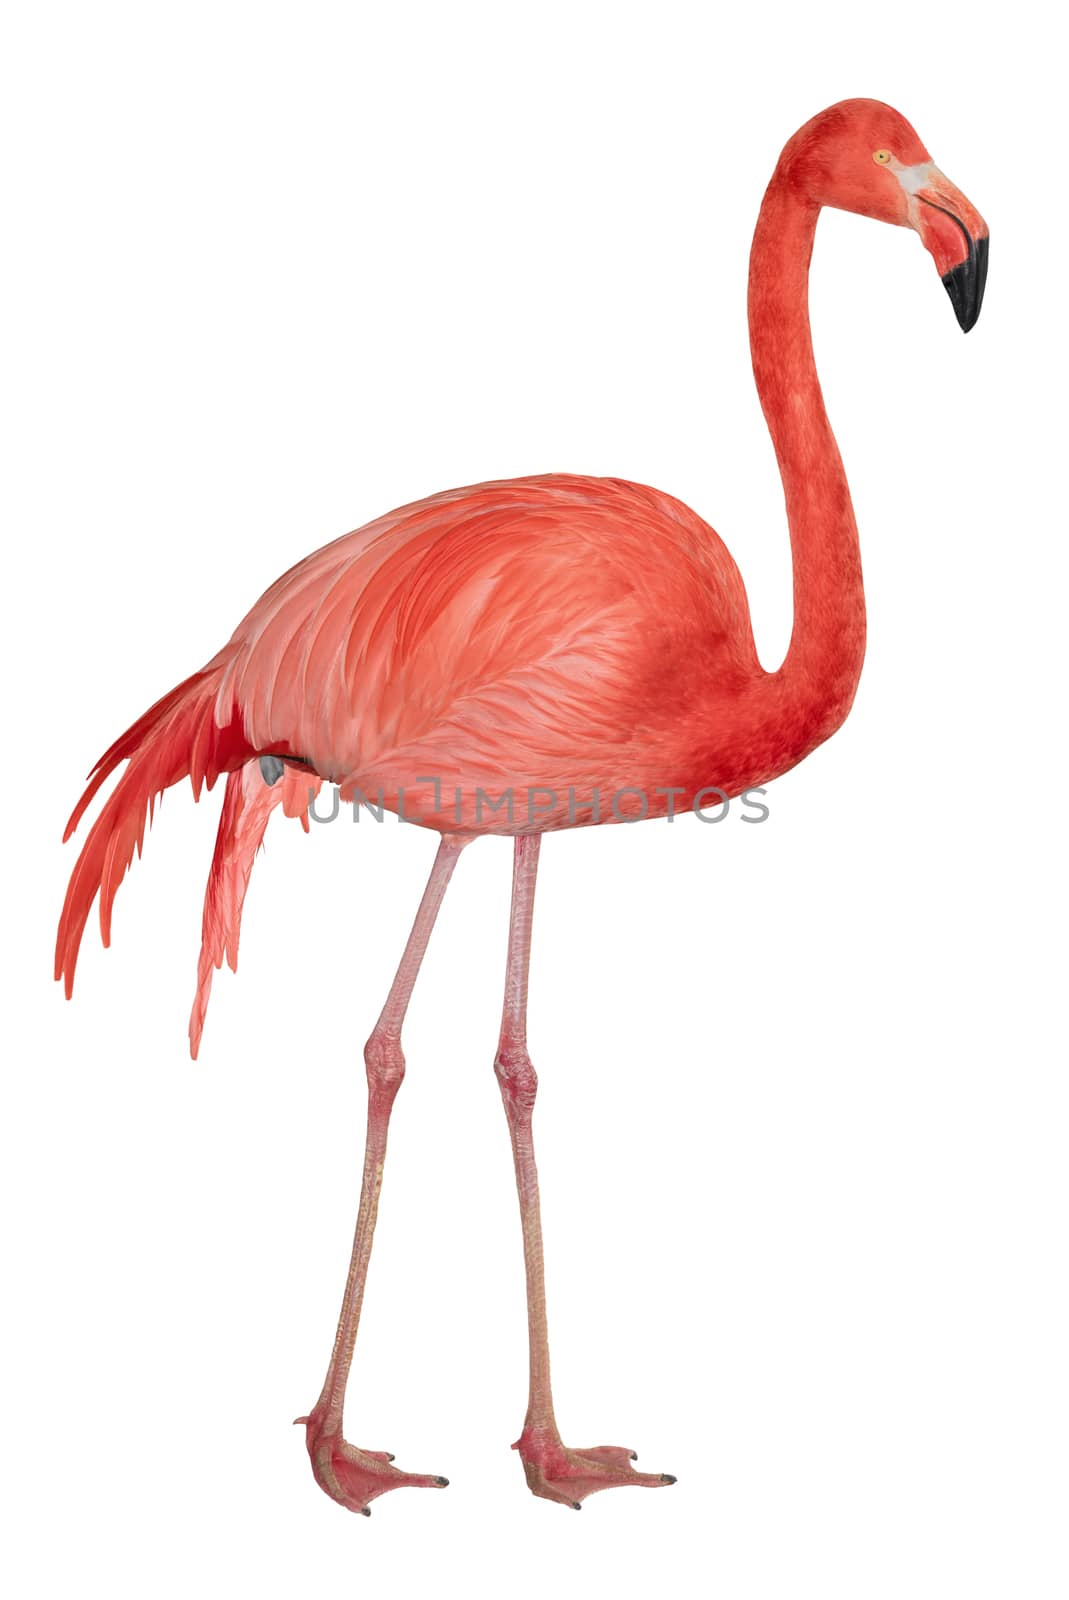 American or Caribbean Flamingo isolated on white background